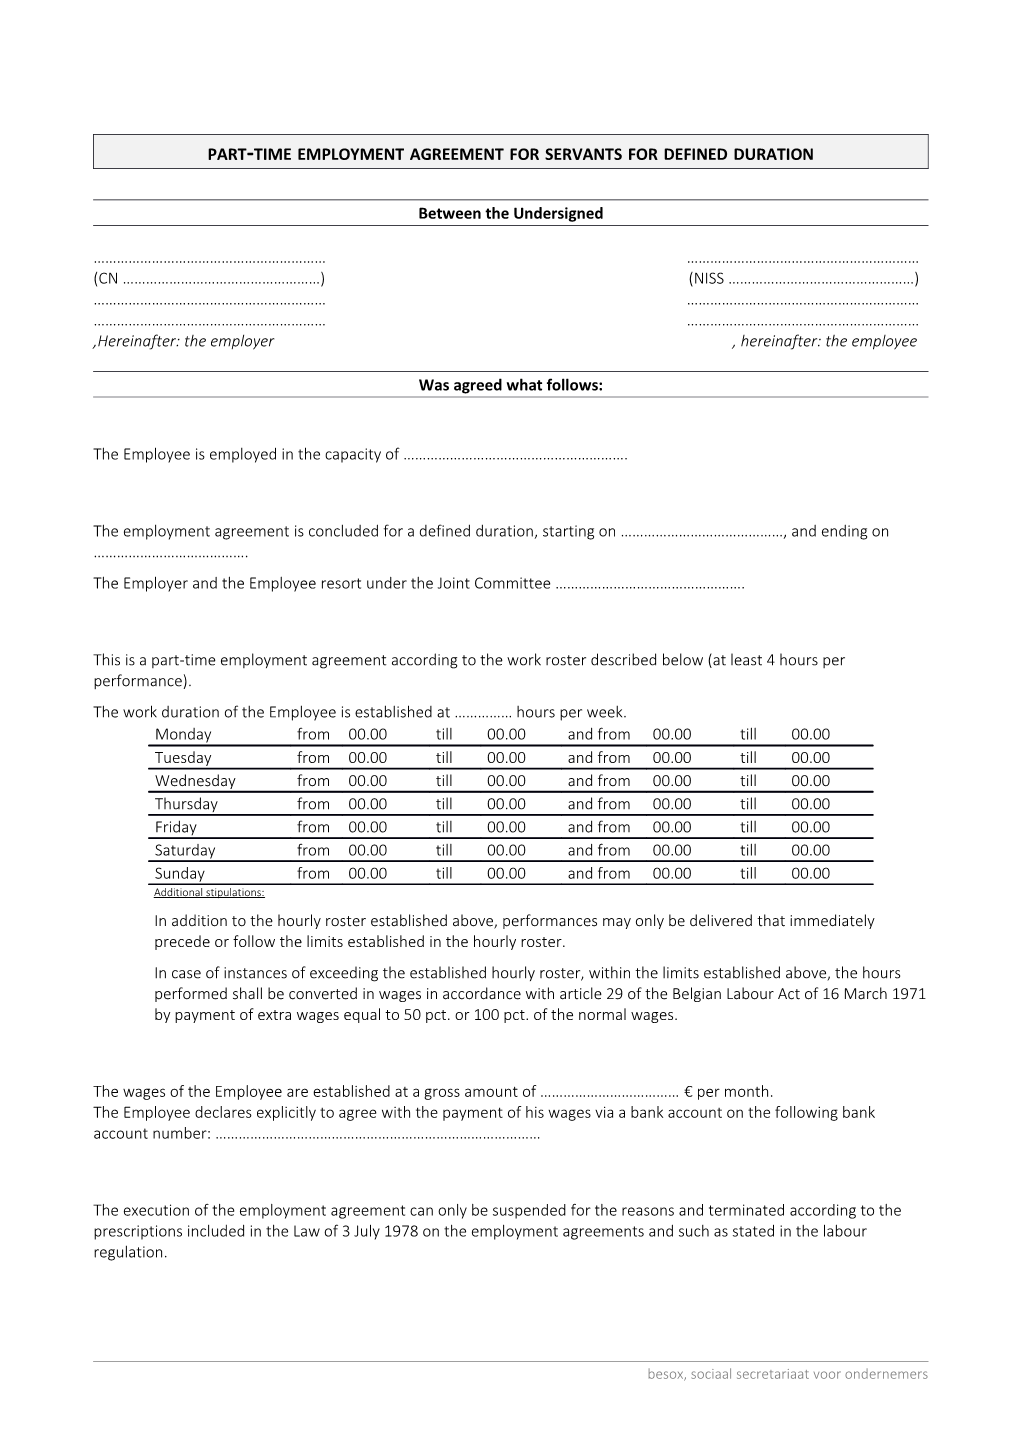 Part-Timeemployment Agreement for Servants for Defined Duration